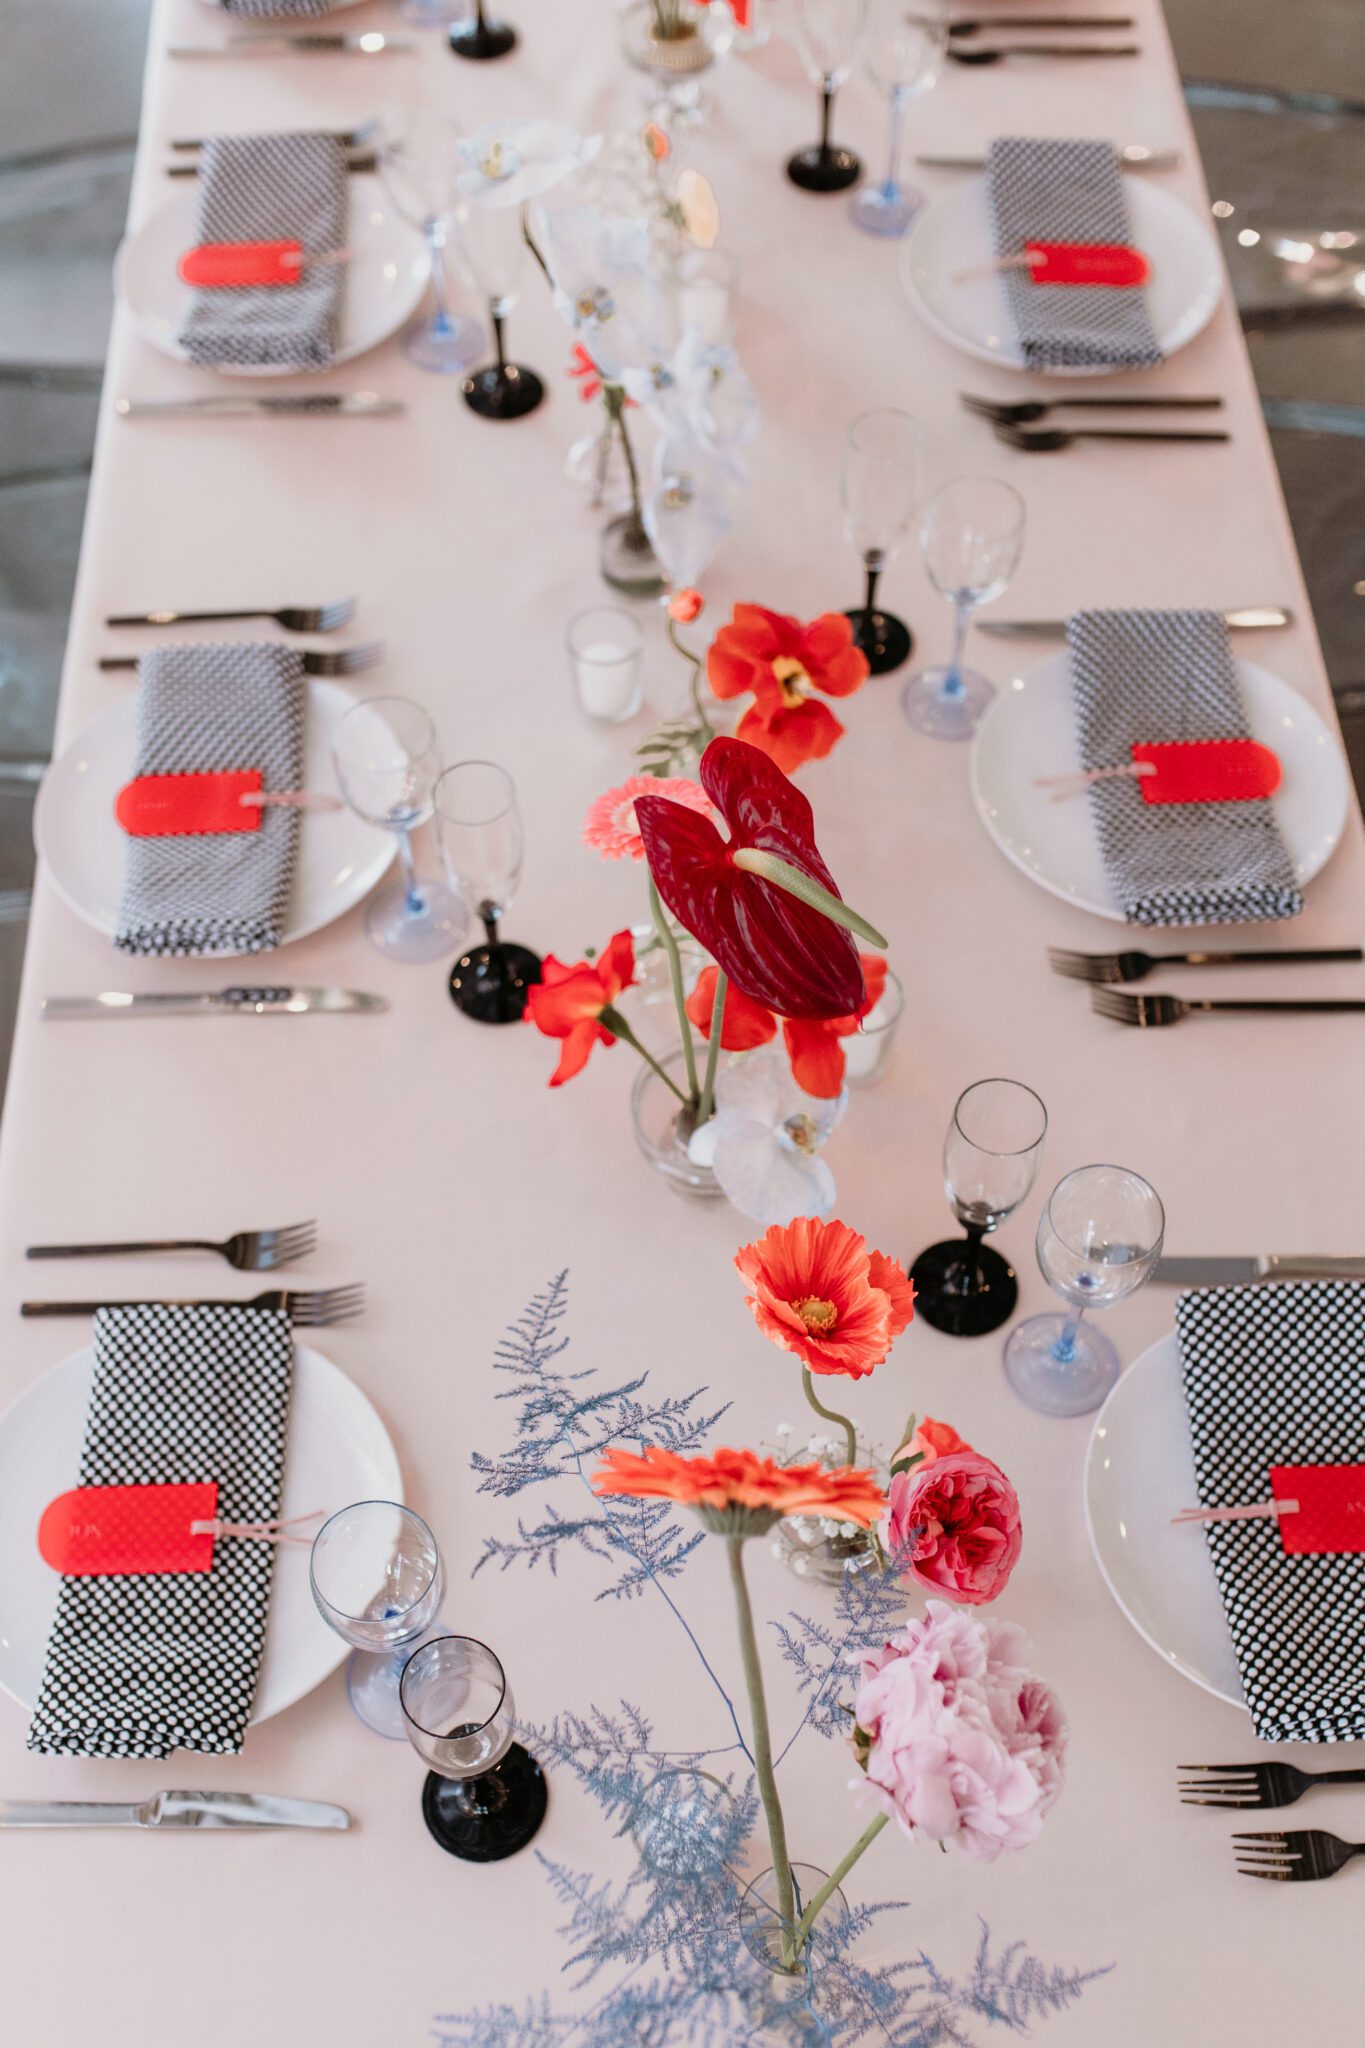 A contemporary wedding tablescape blending modern and retro elements: light pink tablecloth, grey ghost chairs, black acrylic place cards, patterned napkins, retro-inspired table numbers, and ikebana floral arrangements with anthurium flowers.